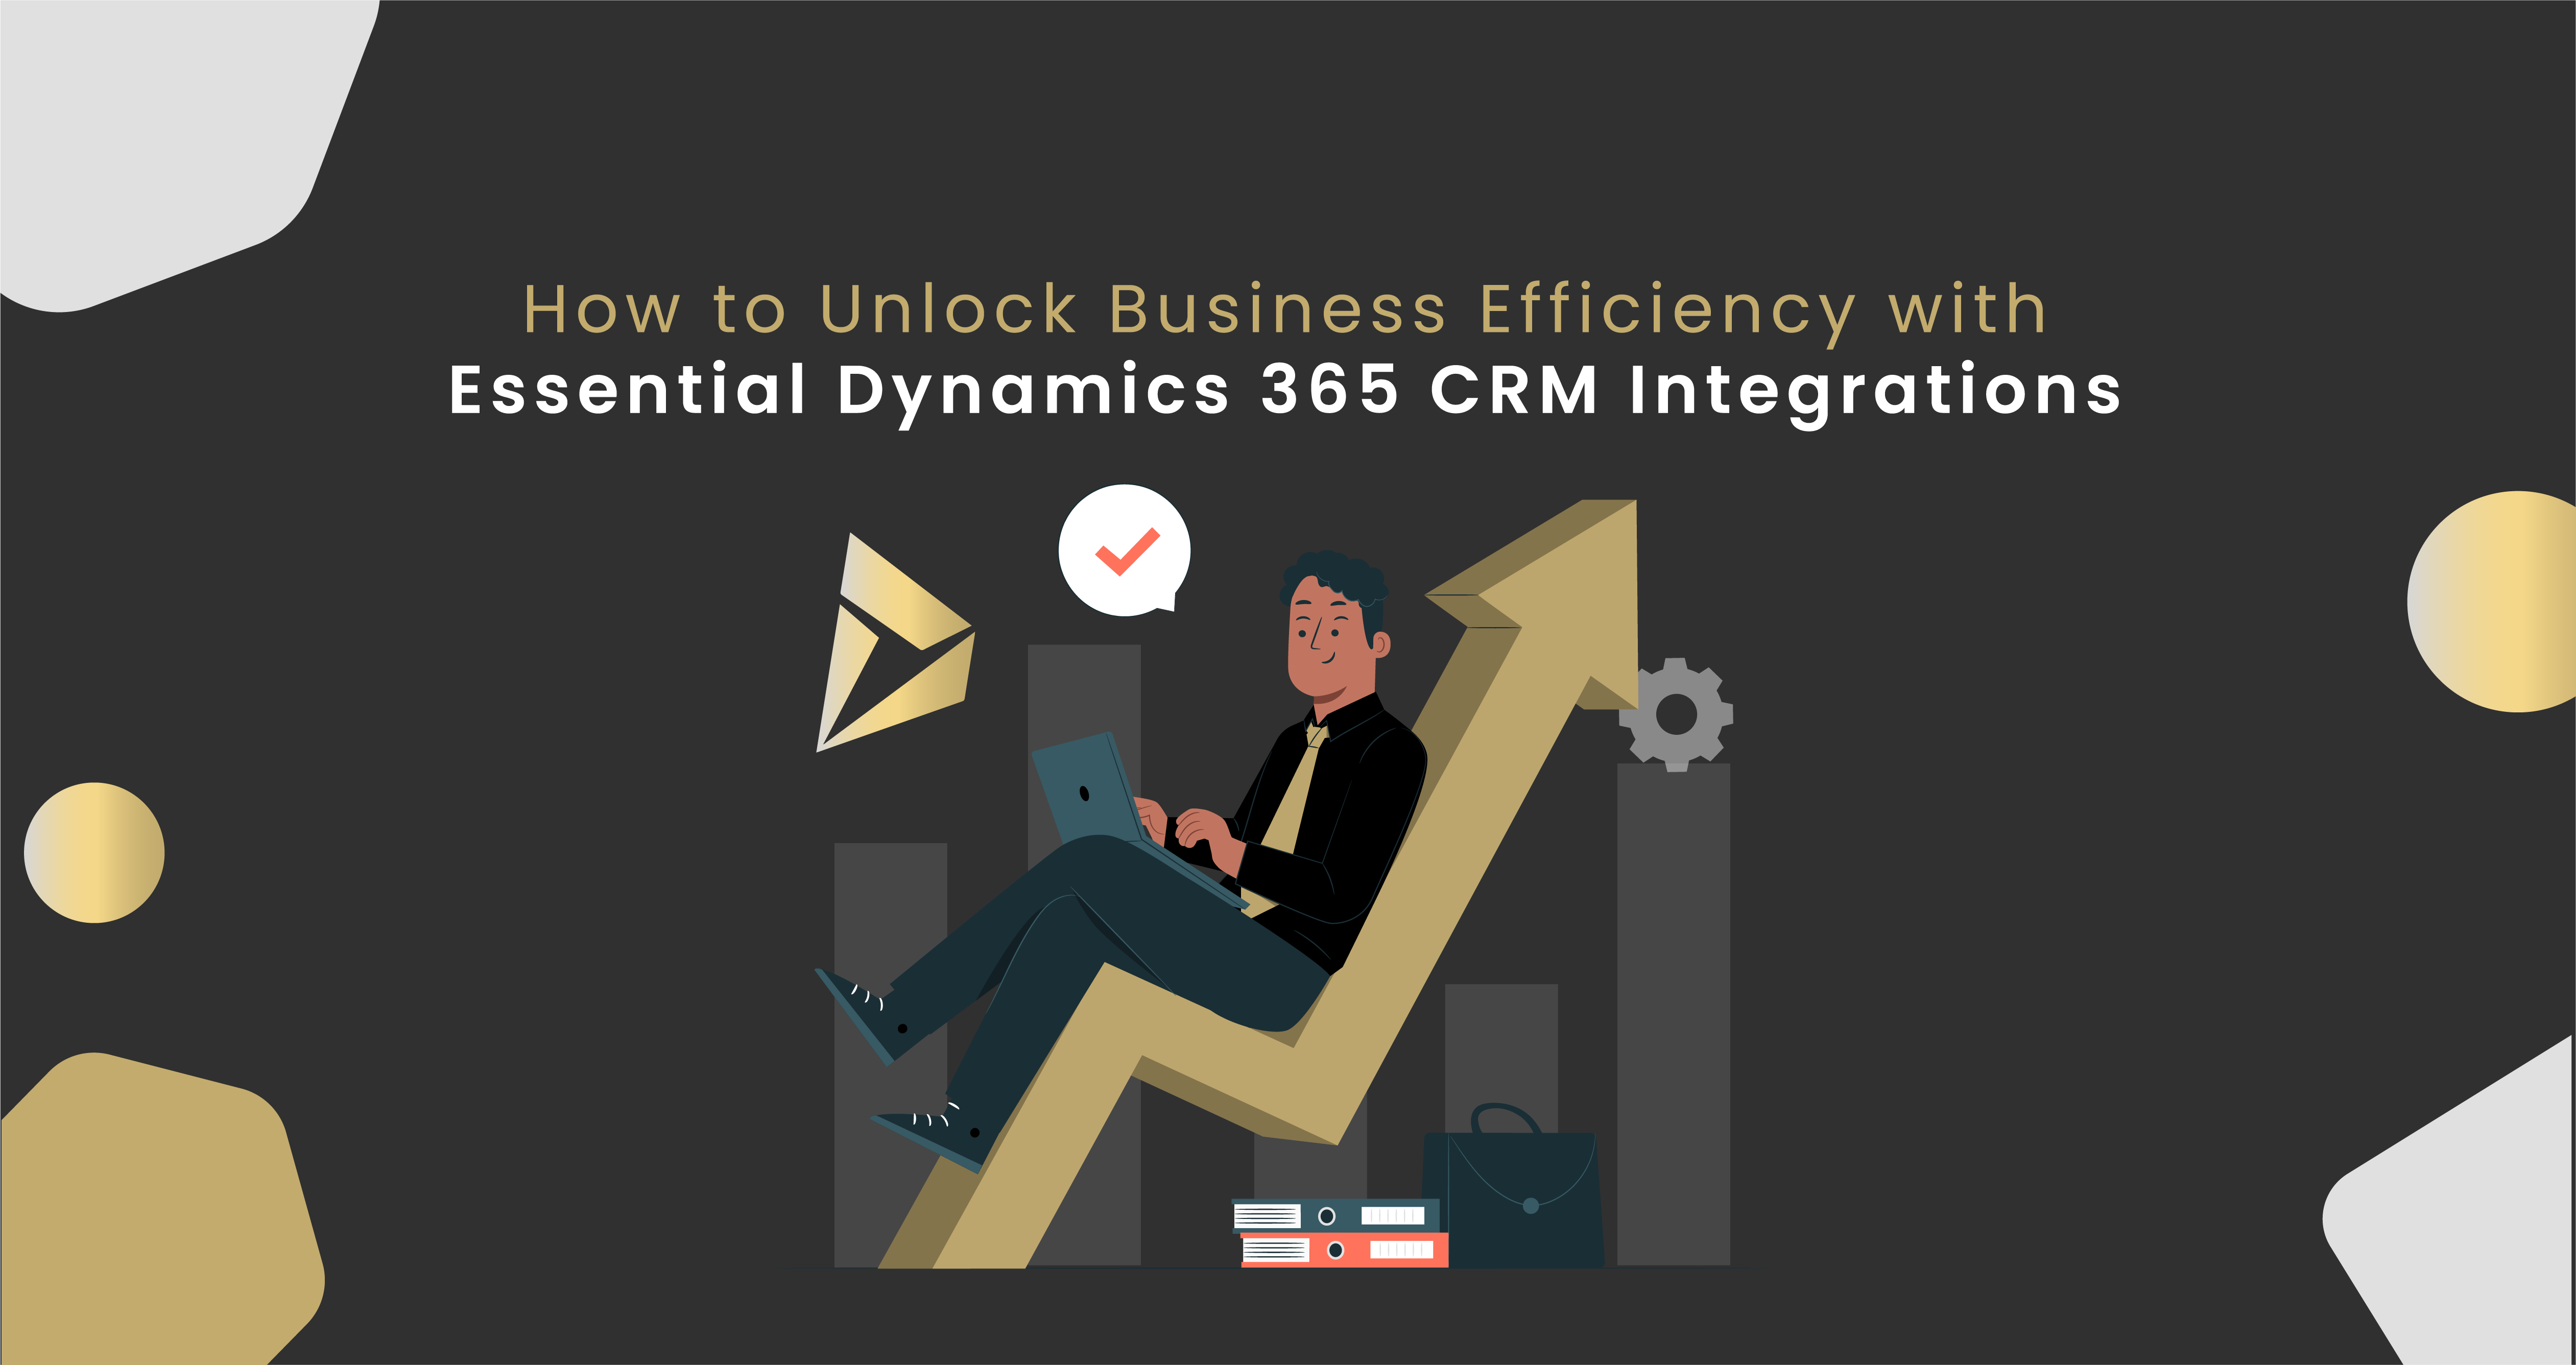 How to Unlock Business Efficiency with Essential Dynamics 365 CRM Integrations